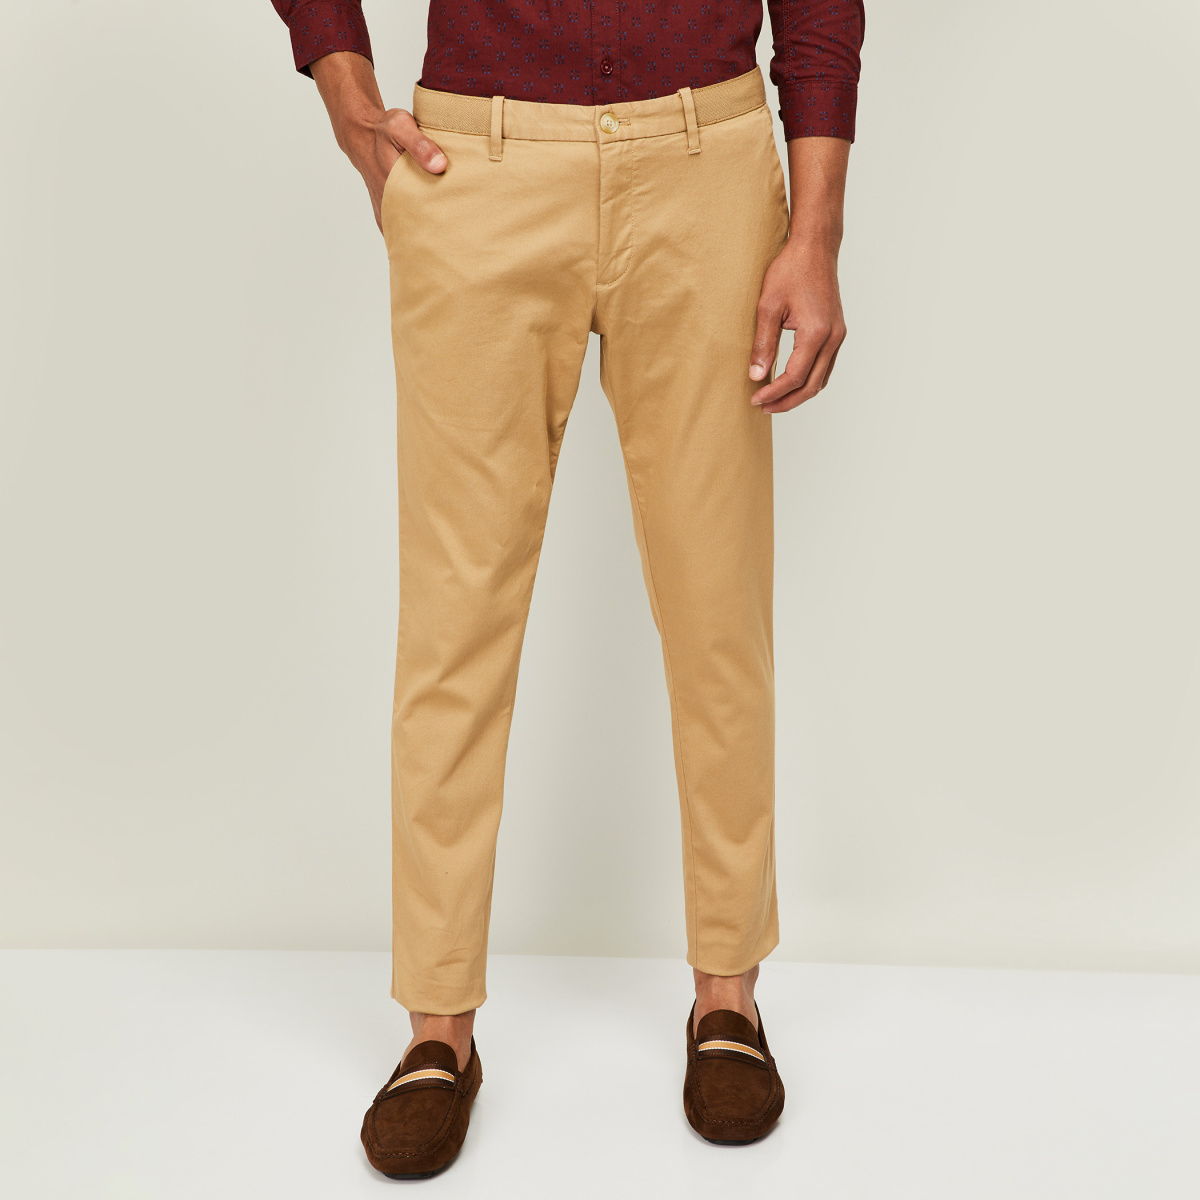 Indian Terrain Trousers & Lowers for Men sale - discounted price | FASHIOLA  INDIA